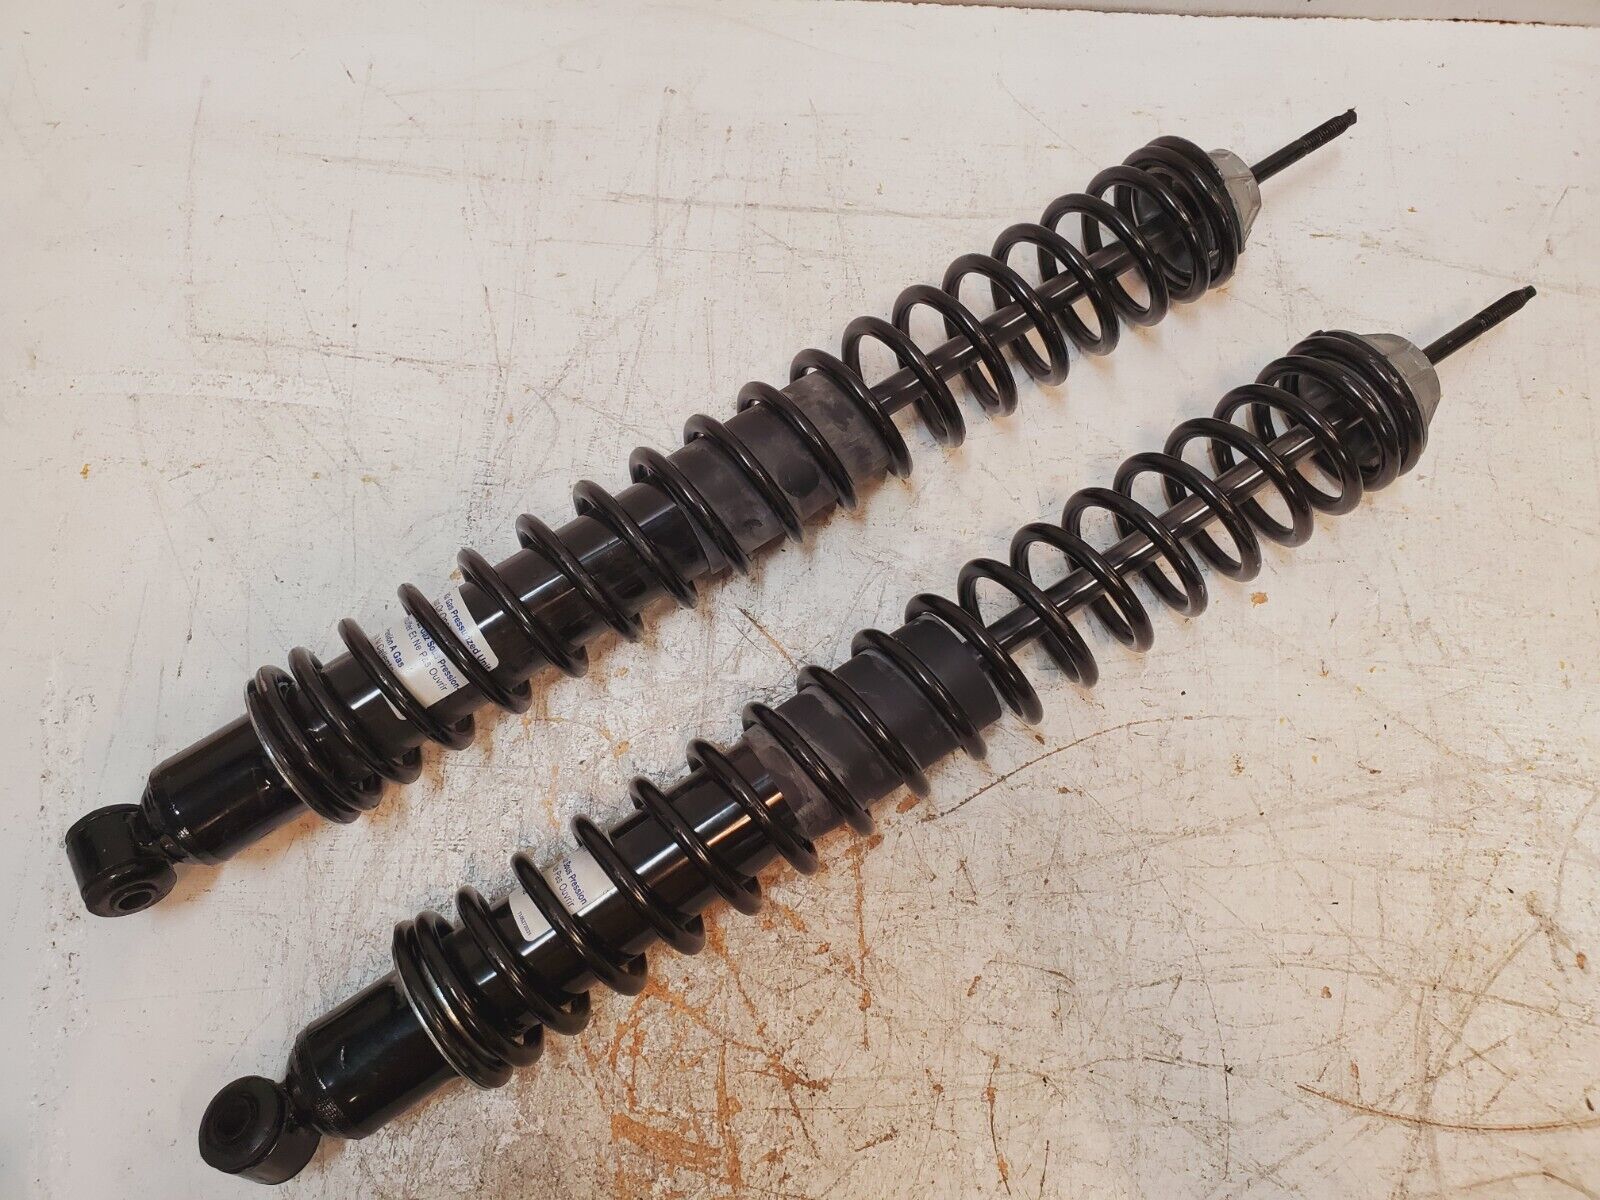 2 Quantity of Shock Absorber 58623 | 1105272031 | P29P710 (2 Qty)